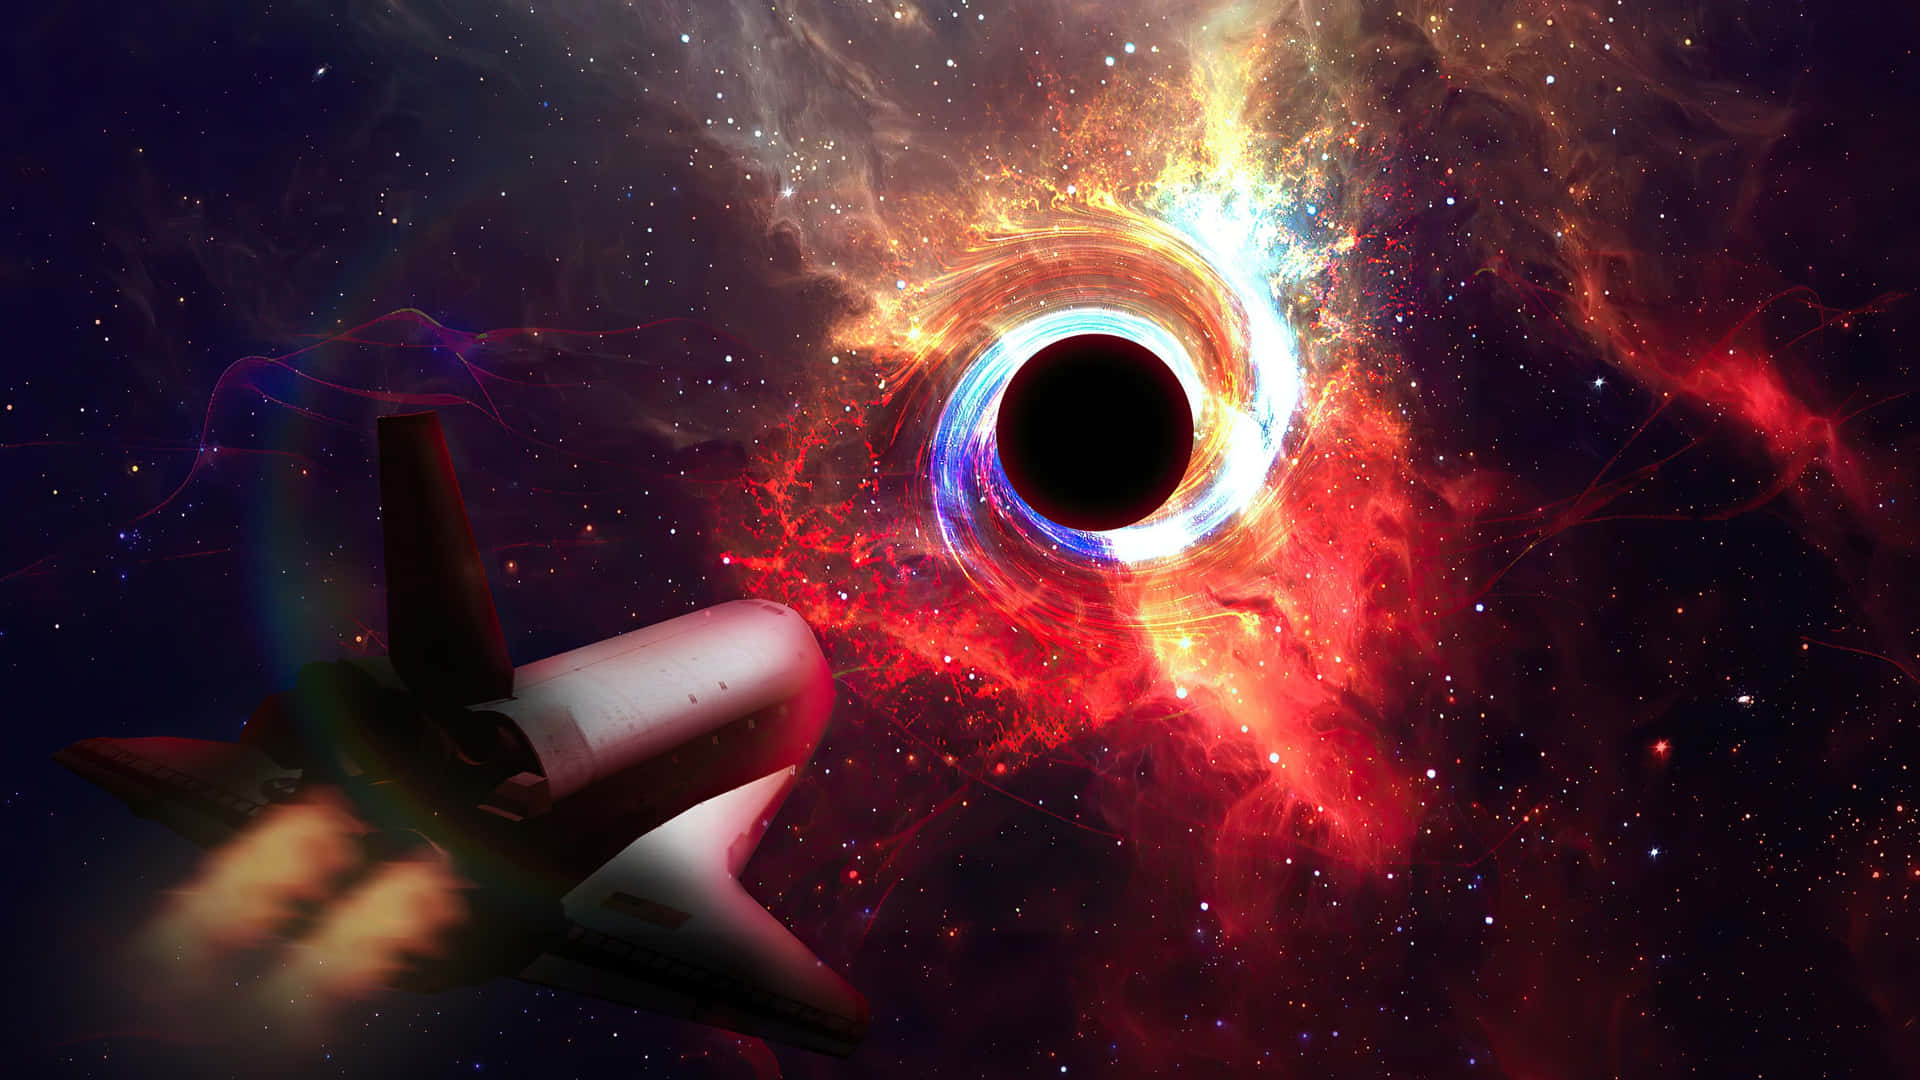 Explore The depths of outer space with a stunning red backdrop Wallpaper